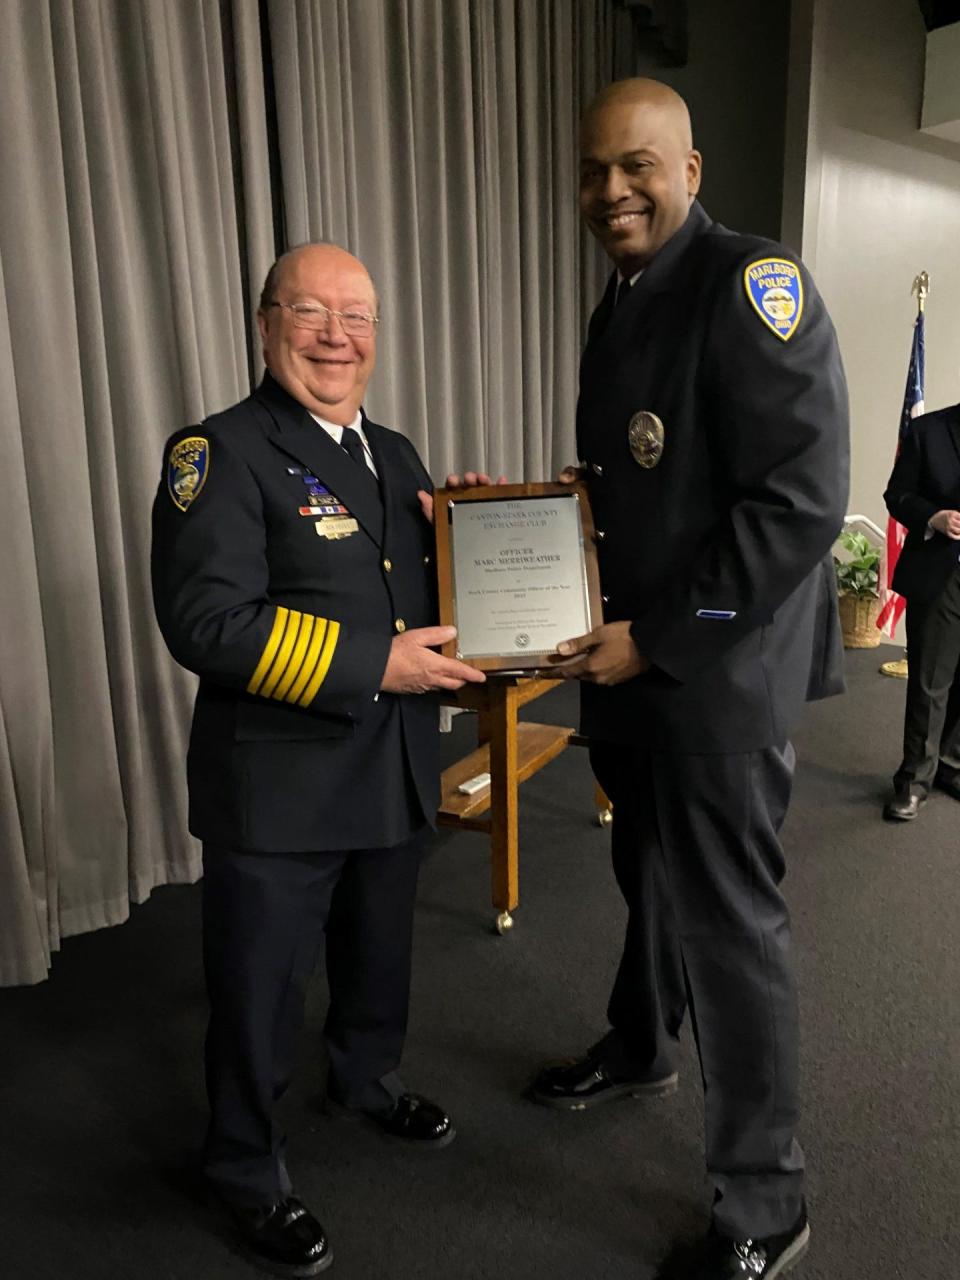 Marlboro Township Police Chief Ron Devies, left, stands with Marc Merriweather, who was named Community Police Officer of the Year on Wednesday at the Crime Prevention Breakfast sponsored by the Exchange Club of Canton-Stark County.